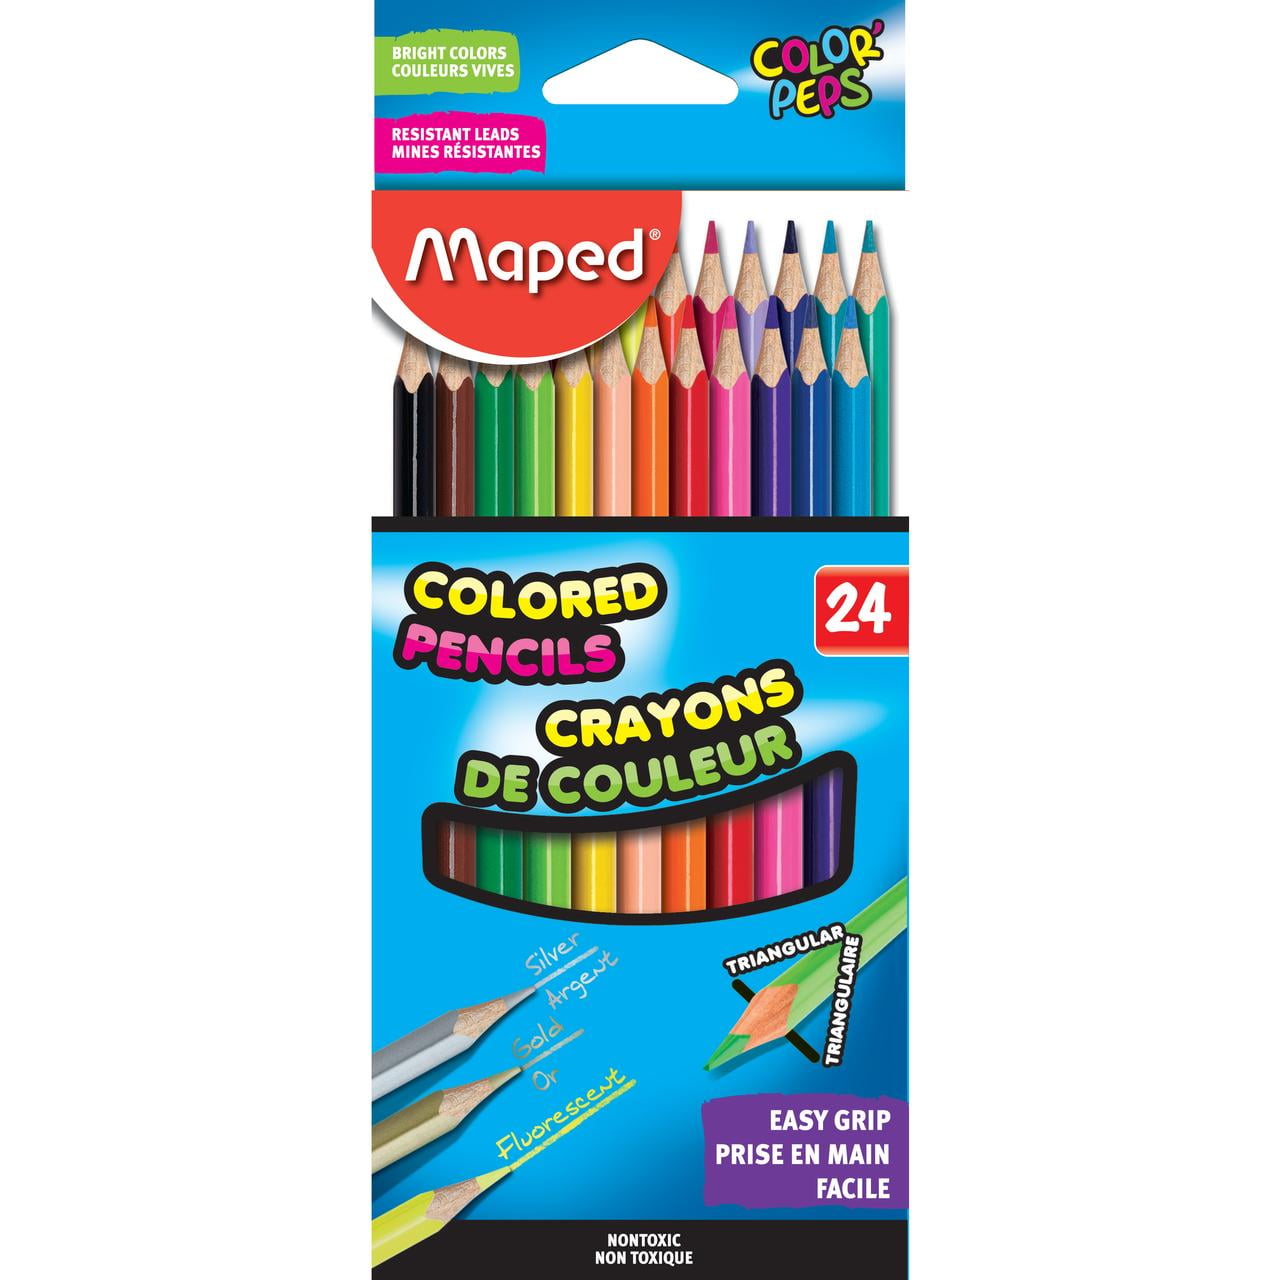 U.S. Art Supply 48 Piece Watercolor Artist Grade Water Soluble Colored  Pencil Set, Full-Sized 7 Pencils - Vibrant Colors, Drawing, Sketching,  Shading, Blending - Kids, Students, Adults, Beginners 